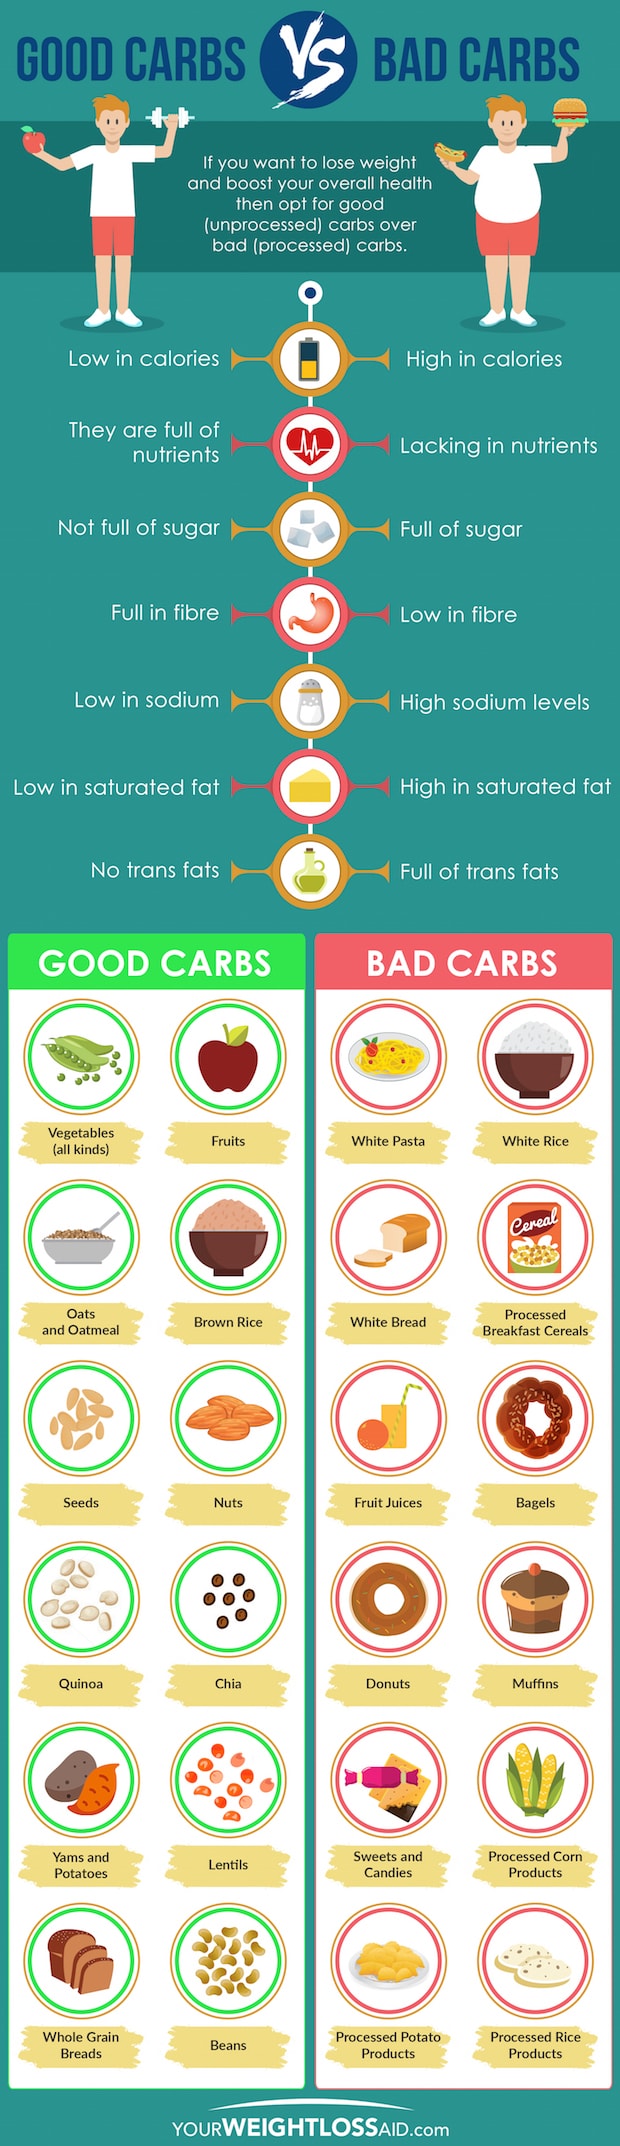 good vs bad carbohydrates